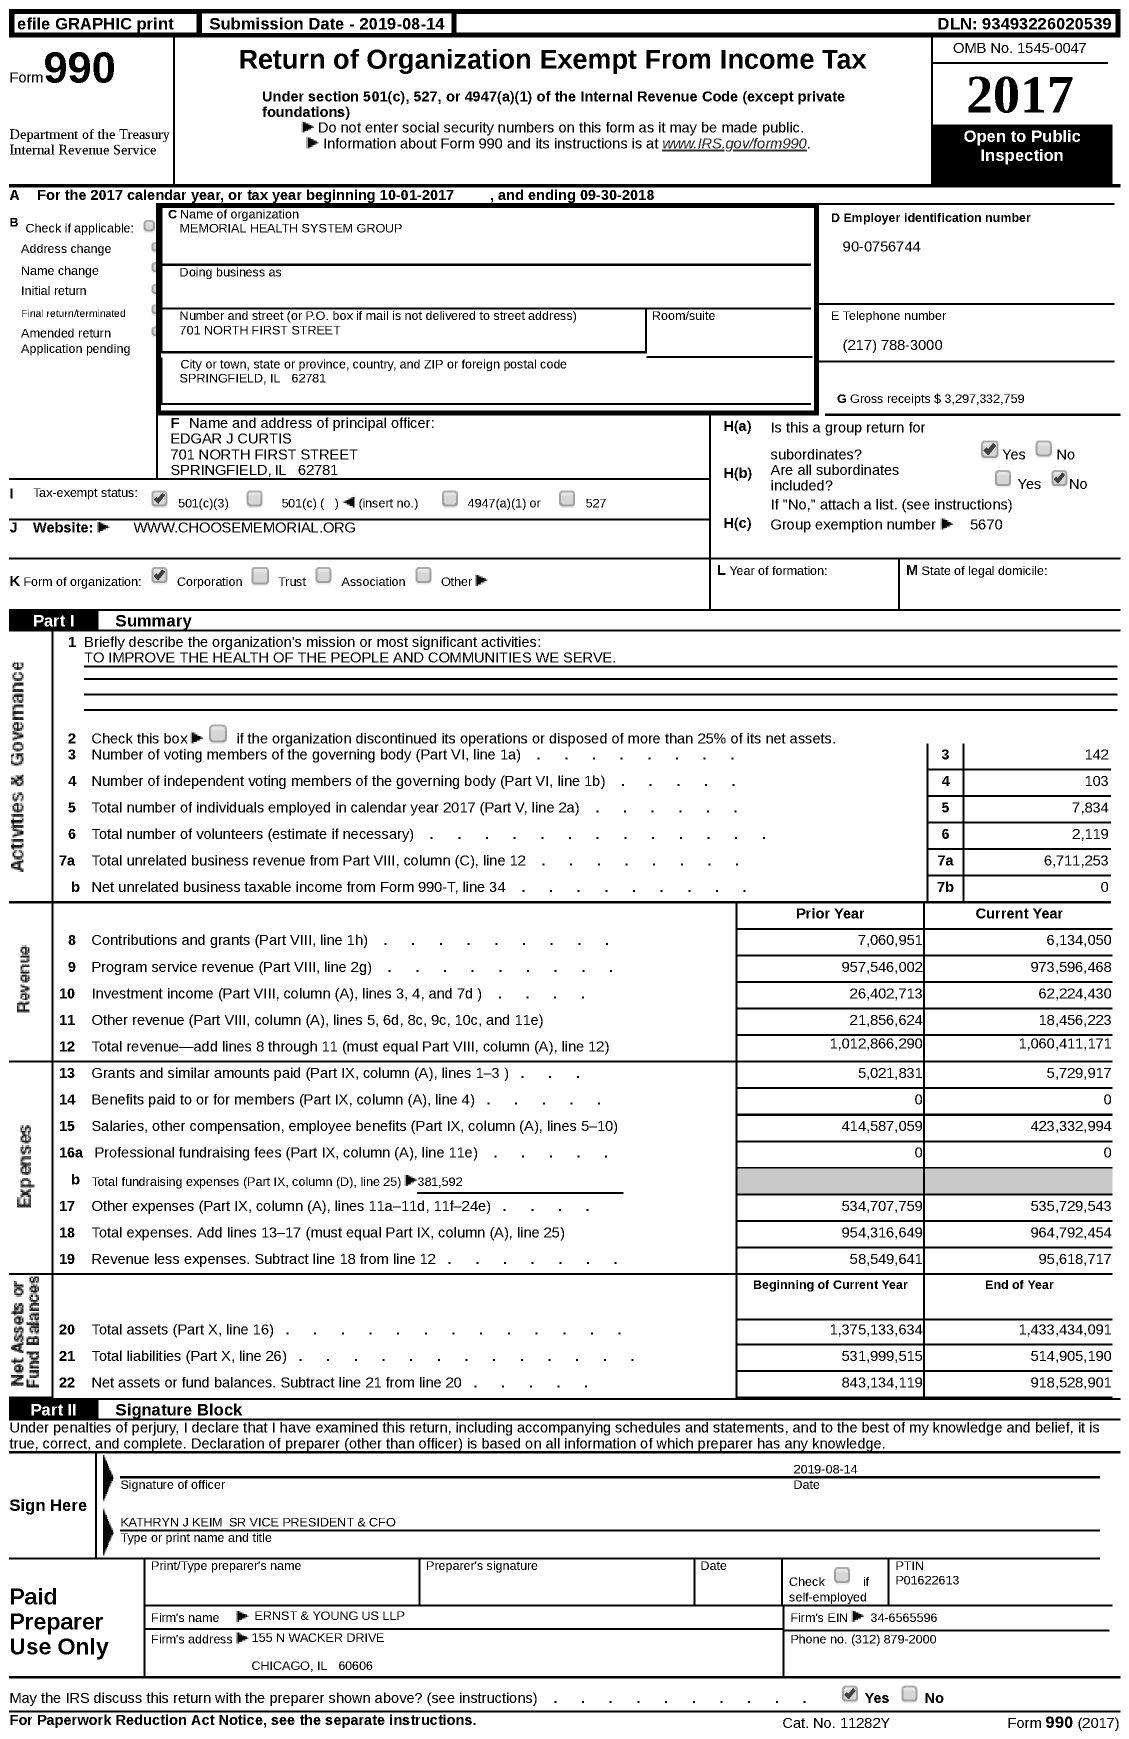 Image of first page of 2017 Form 990 for Memorial Health System (MHS)